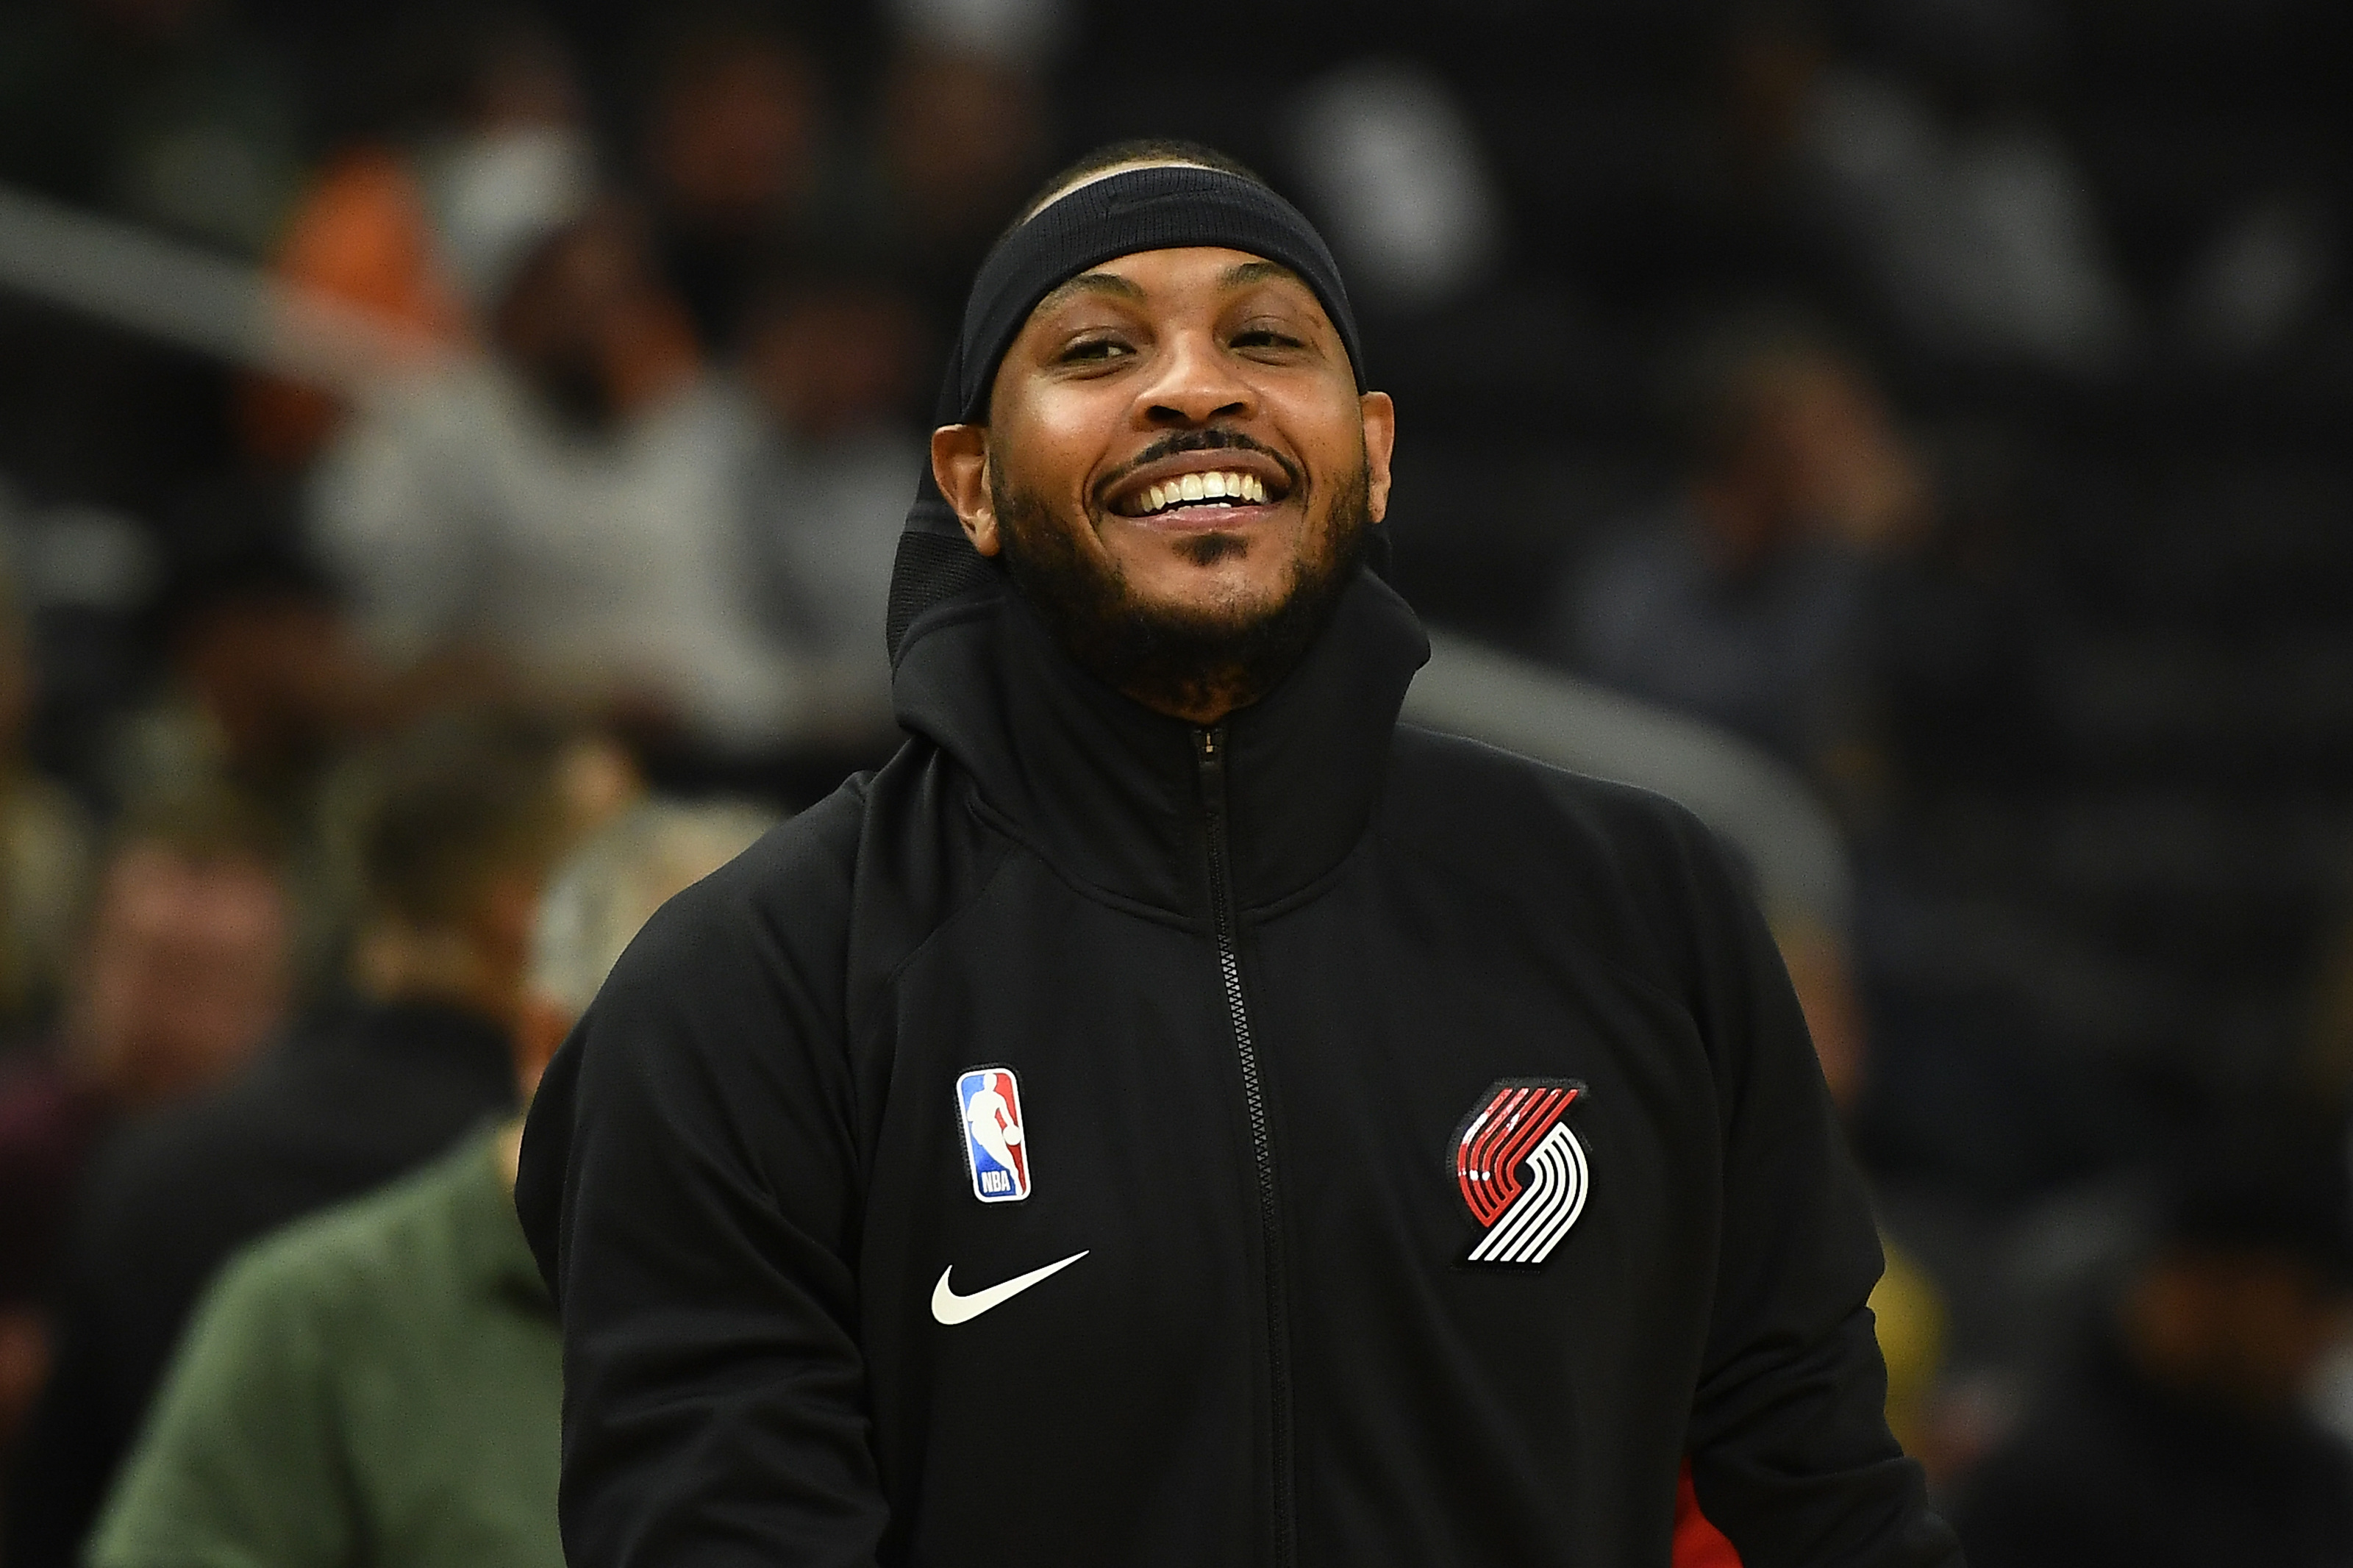 Carmelo Anthony may actually be the answer for the Trail Blazers